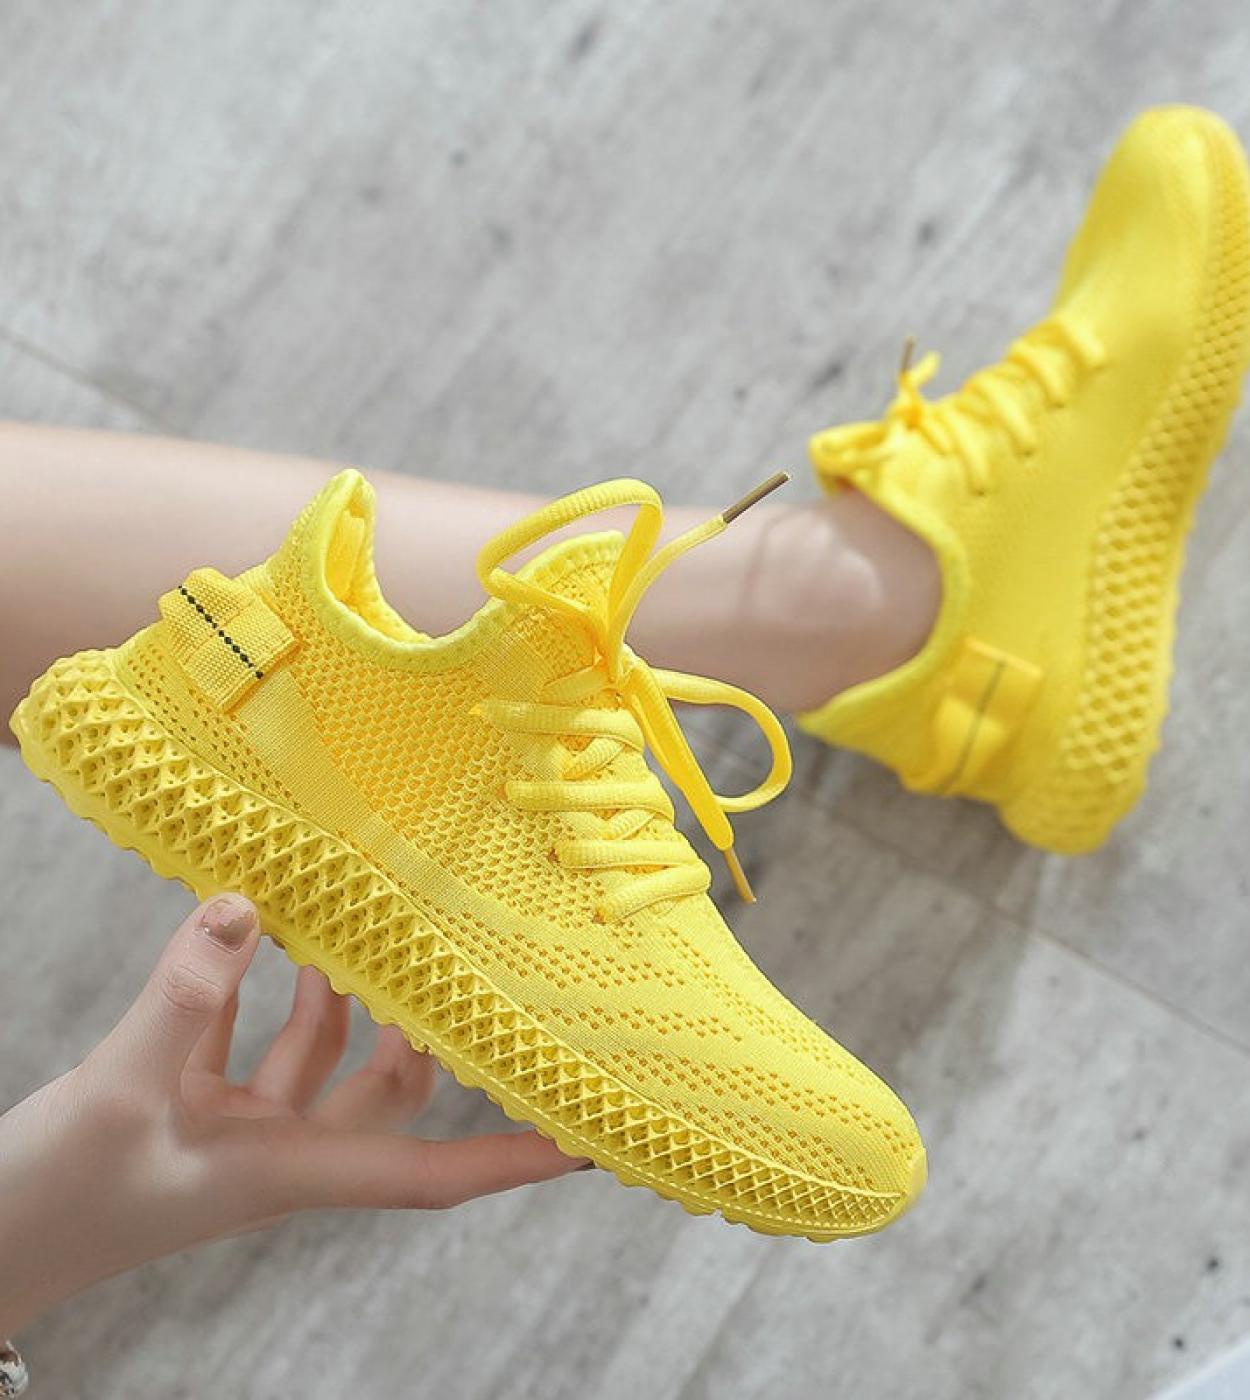 Yellow Womens Sneakers  Womens Mesh Sneakers  Yellow Mesh Sneakers  Sneakers Women  Womens Vulcanize Shoes  